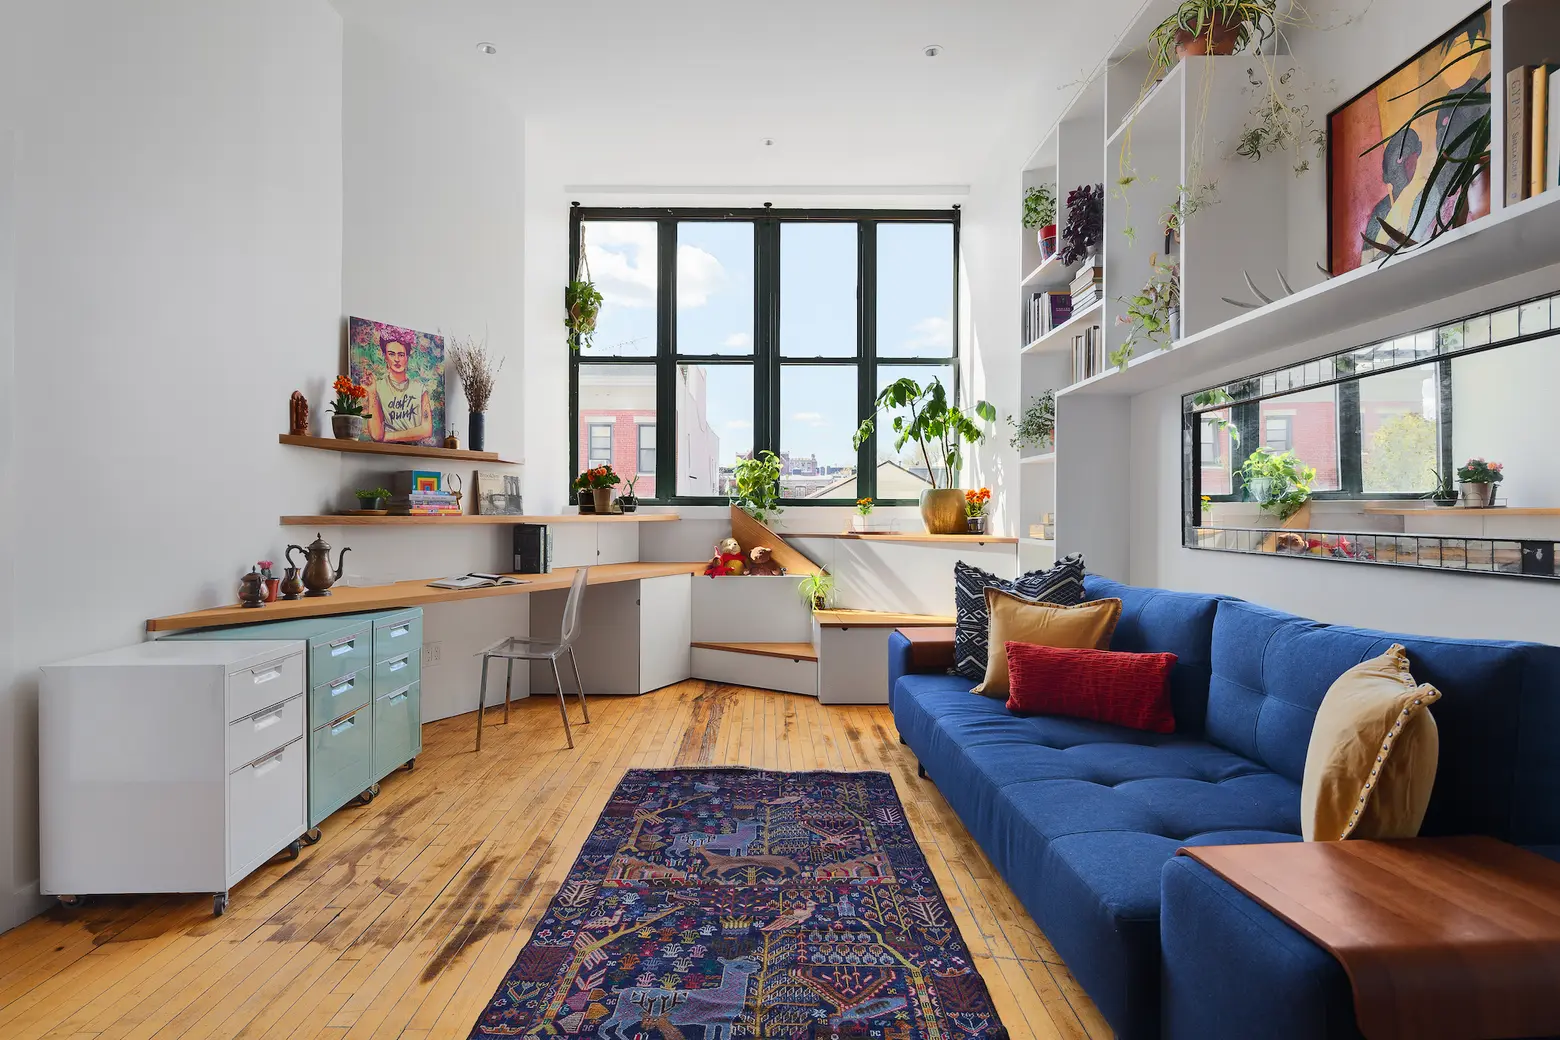 Asking $1.15M, this creative Bed-Stuy loft is located in a converted 1930s box factory